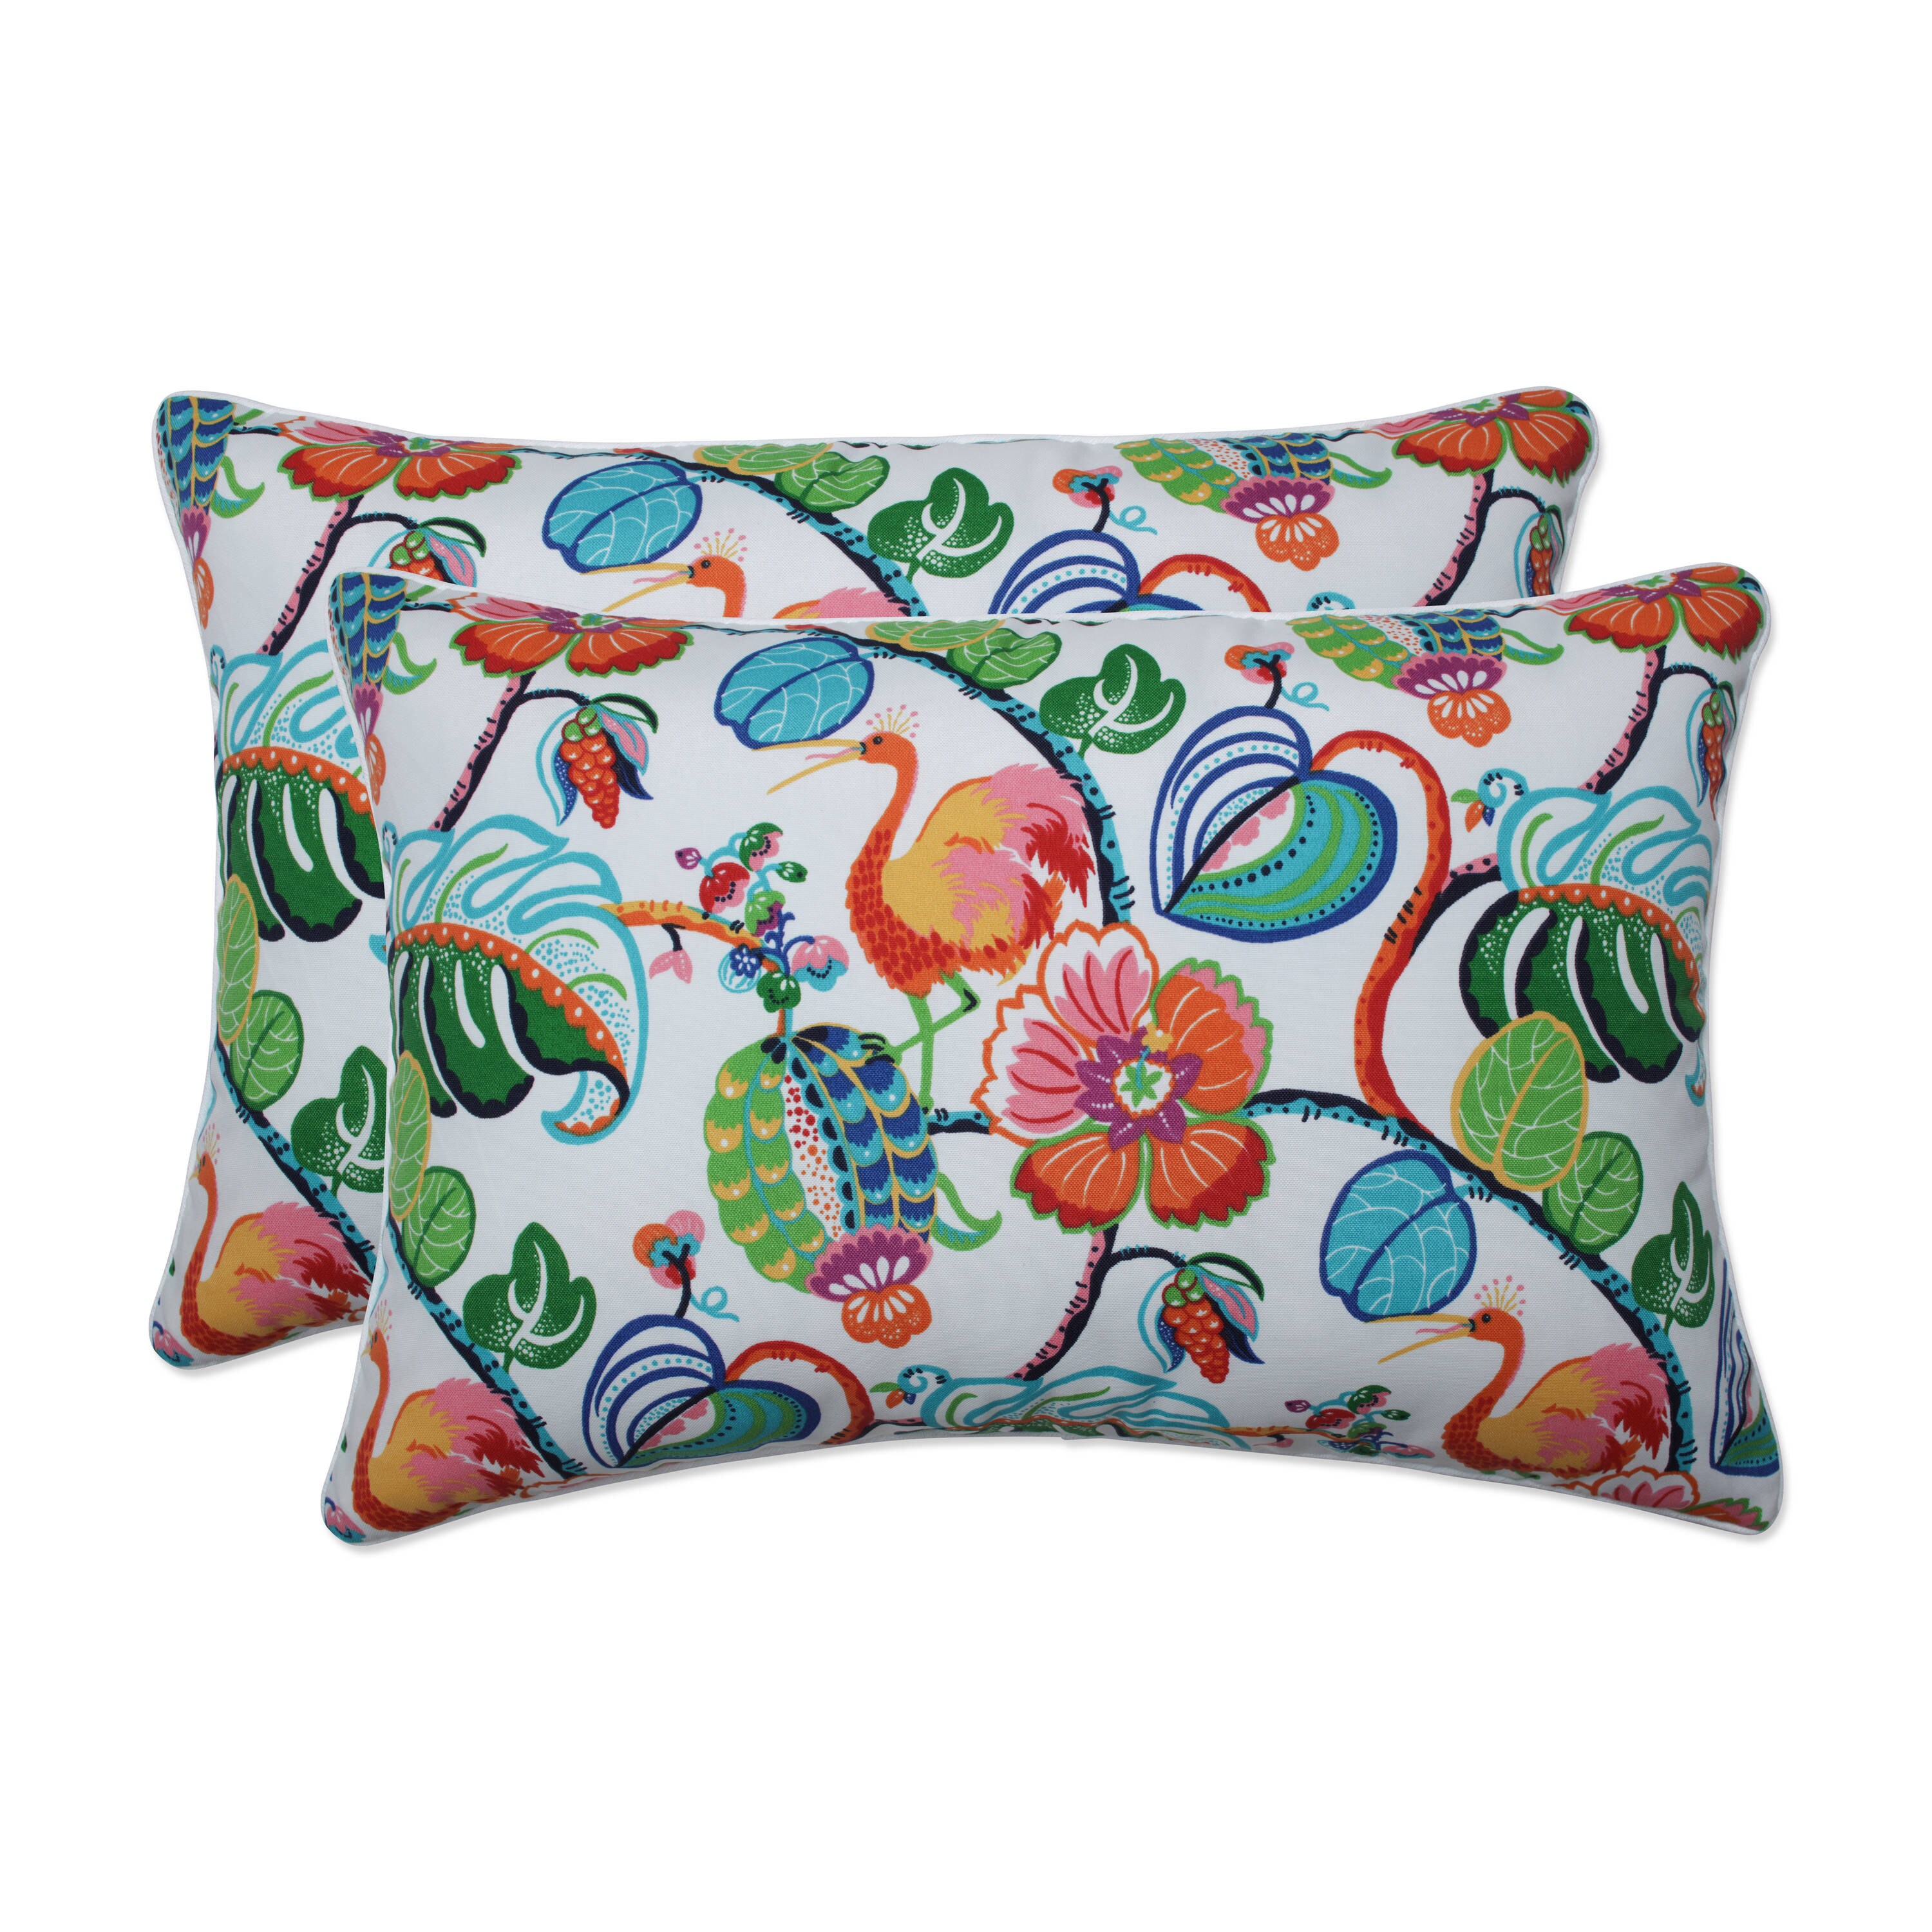 Petals Polycotton 18 x 18 printed Floral Cushion Cover in Colors 